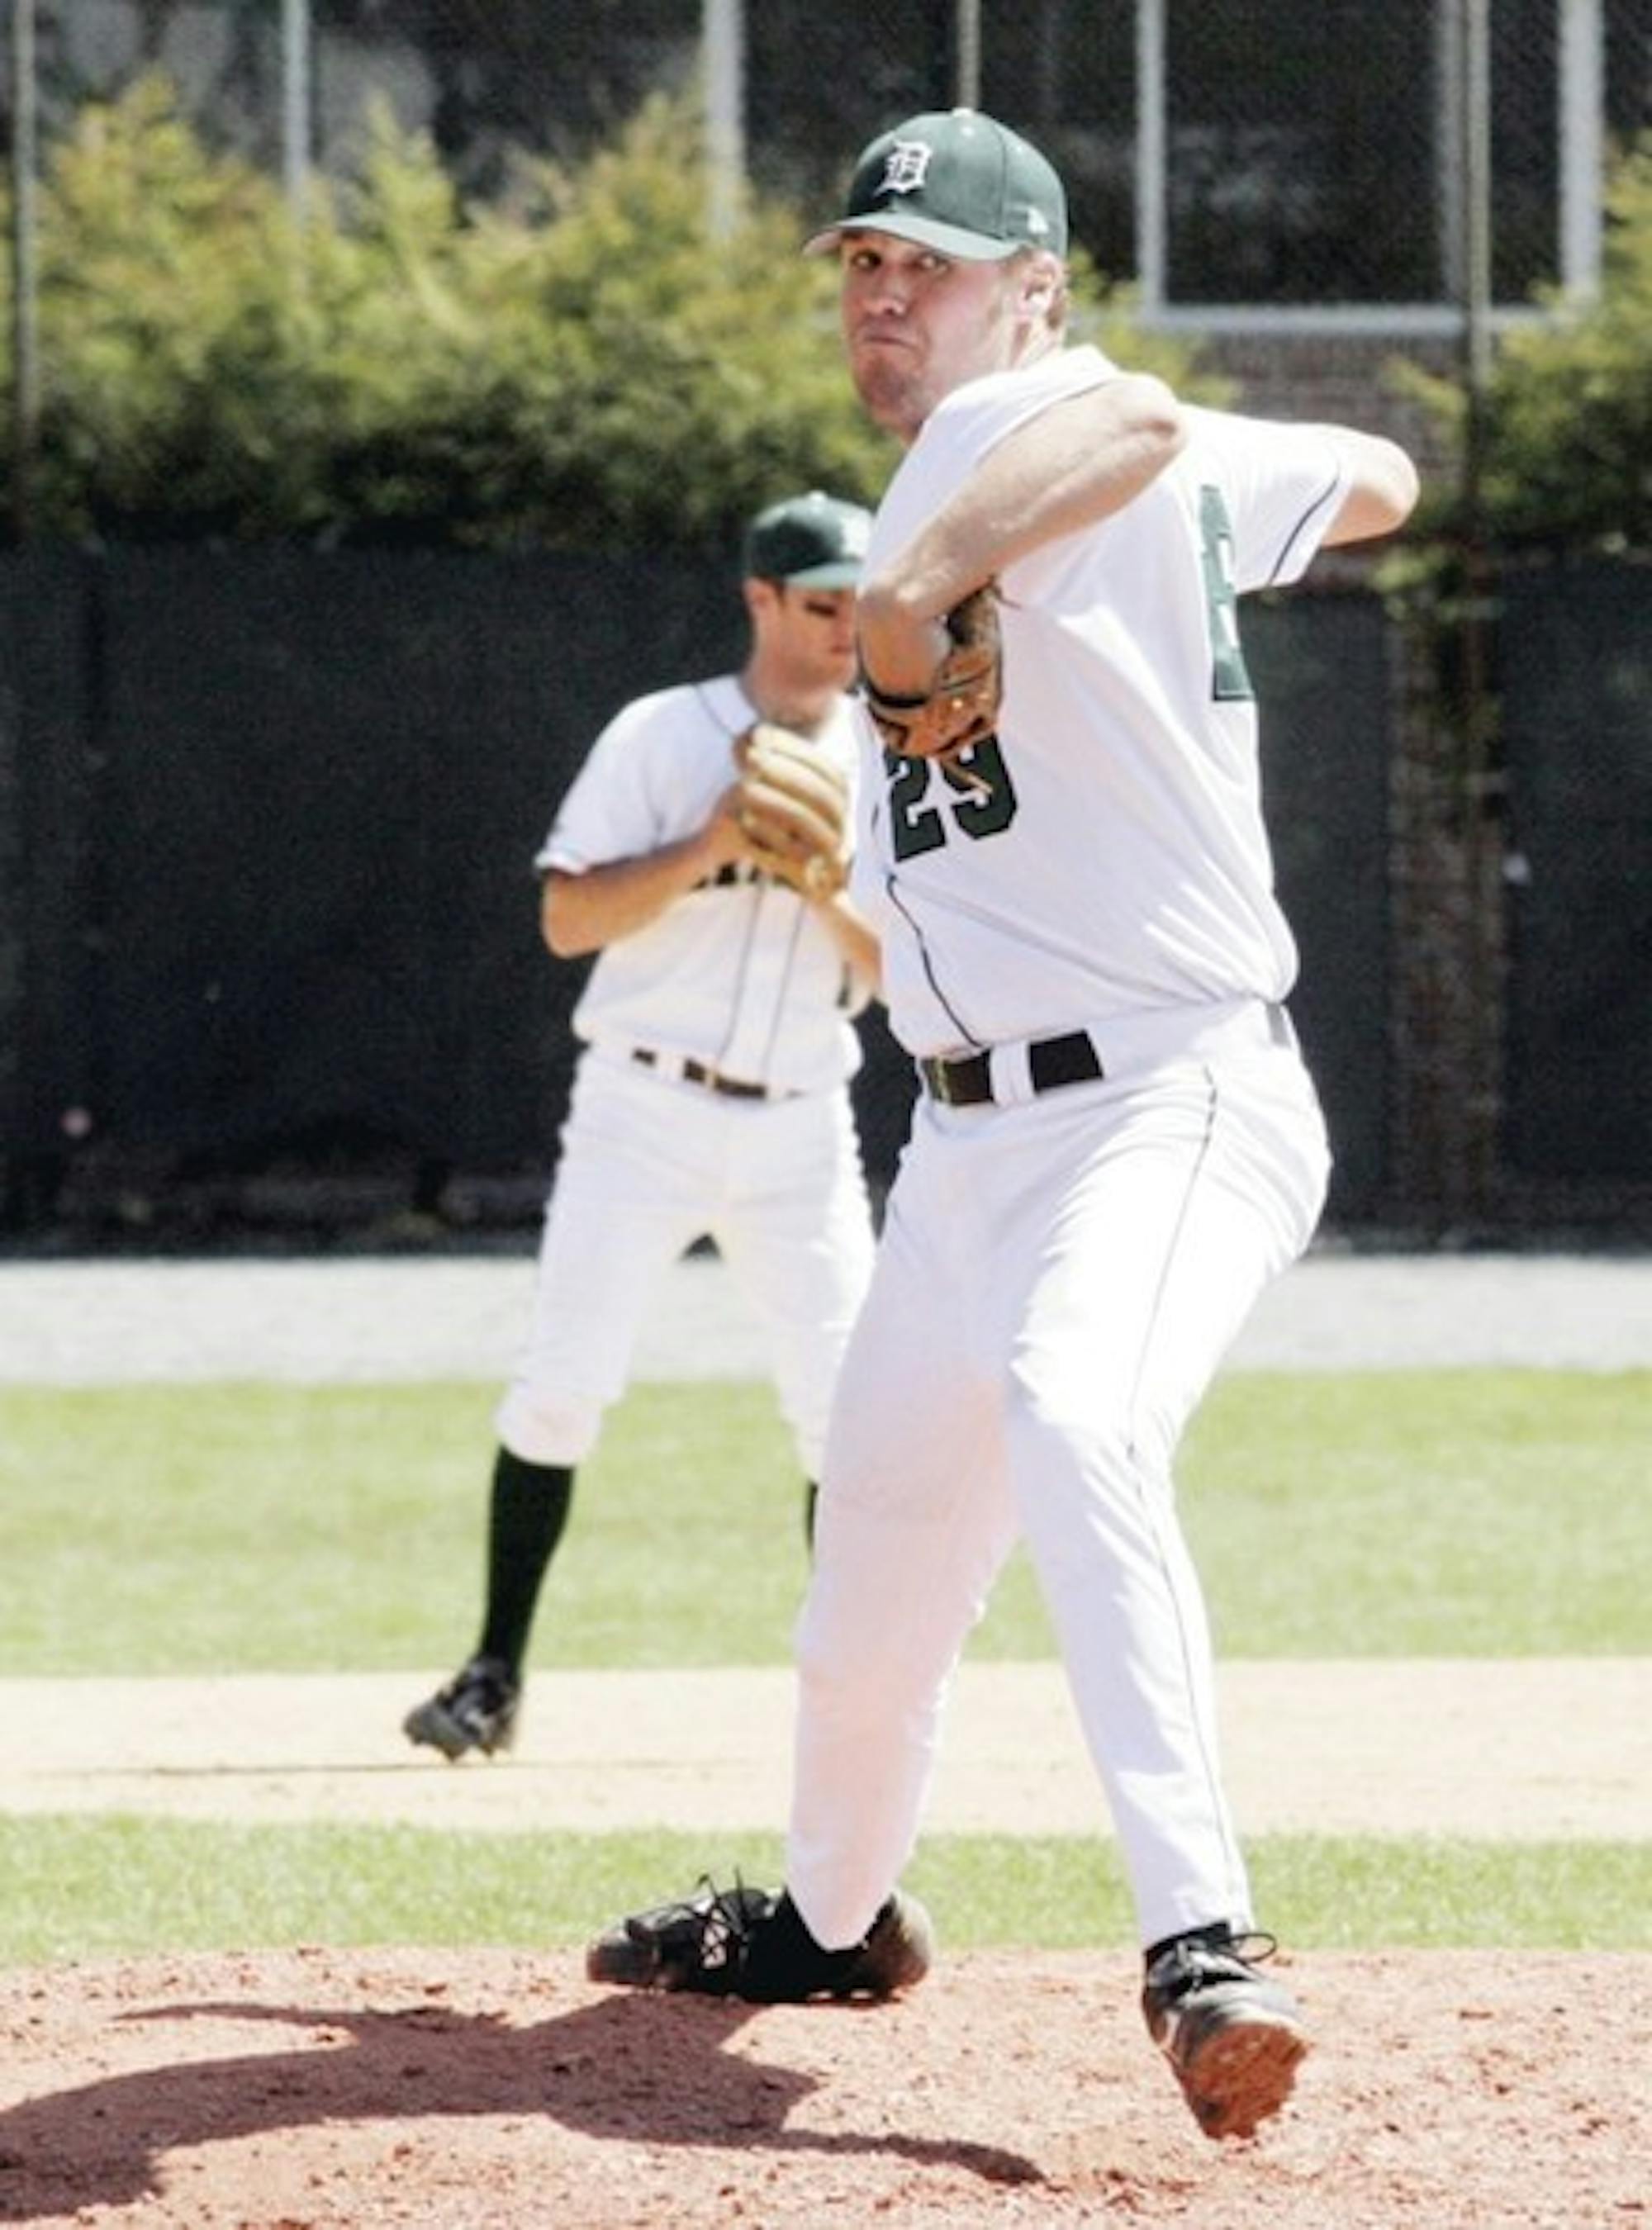 Jeff Wilkerson '07 pitched five and one-third innings of relief Thursday, allowing four runs (three earned) on six hits as BC downed the Big Green 9-6.